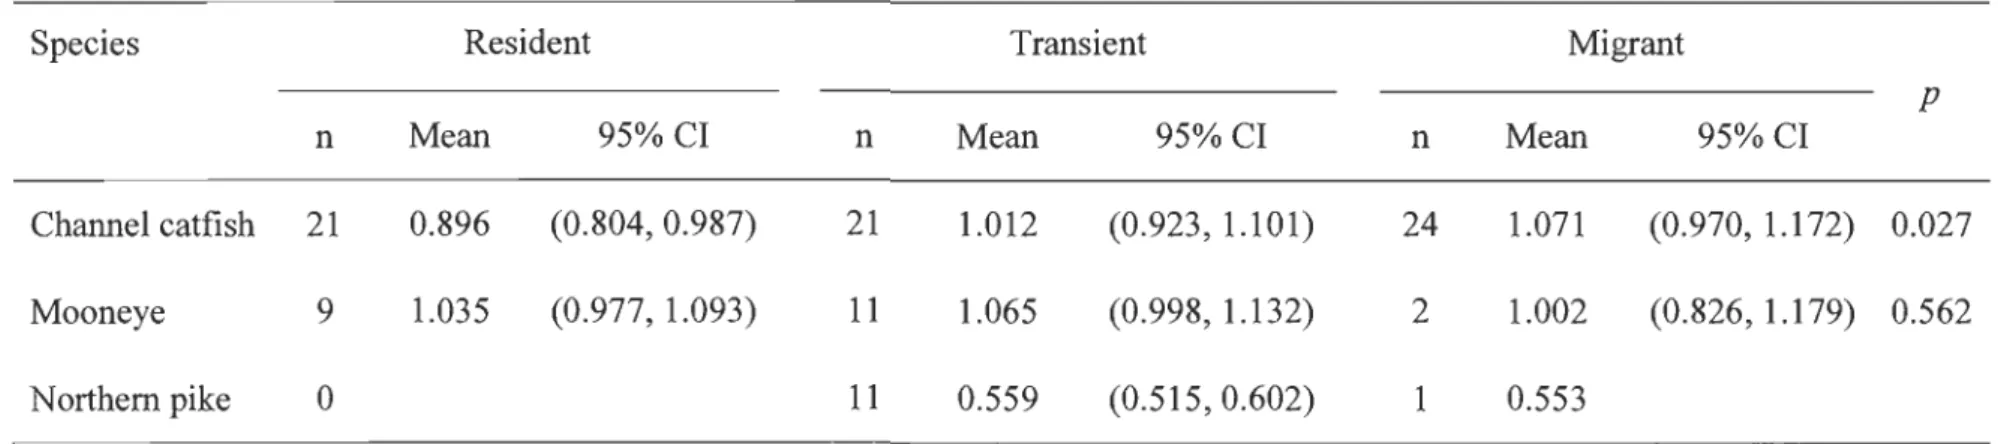 Table  1.  Body  condition of individuals,  by  migratory  contingent,  for  the  predominantly transient  species  (channel  catfish,  mooneye,  and northem pike) captured in the SMR downstream of Gabelle Dam